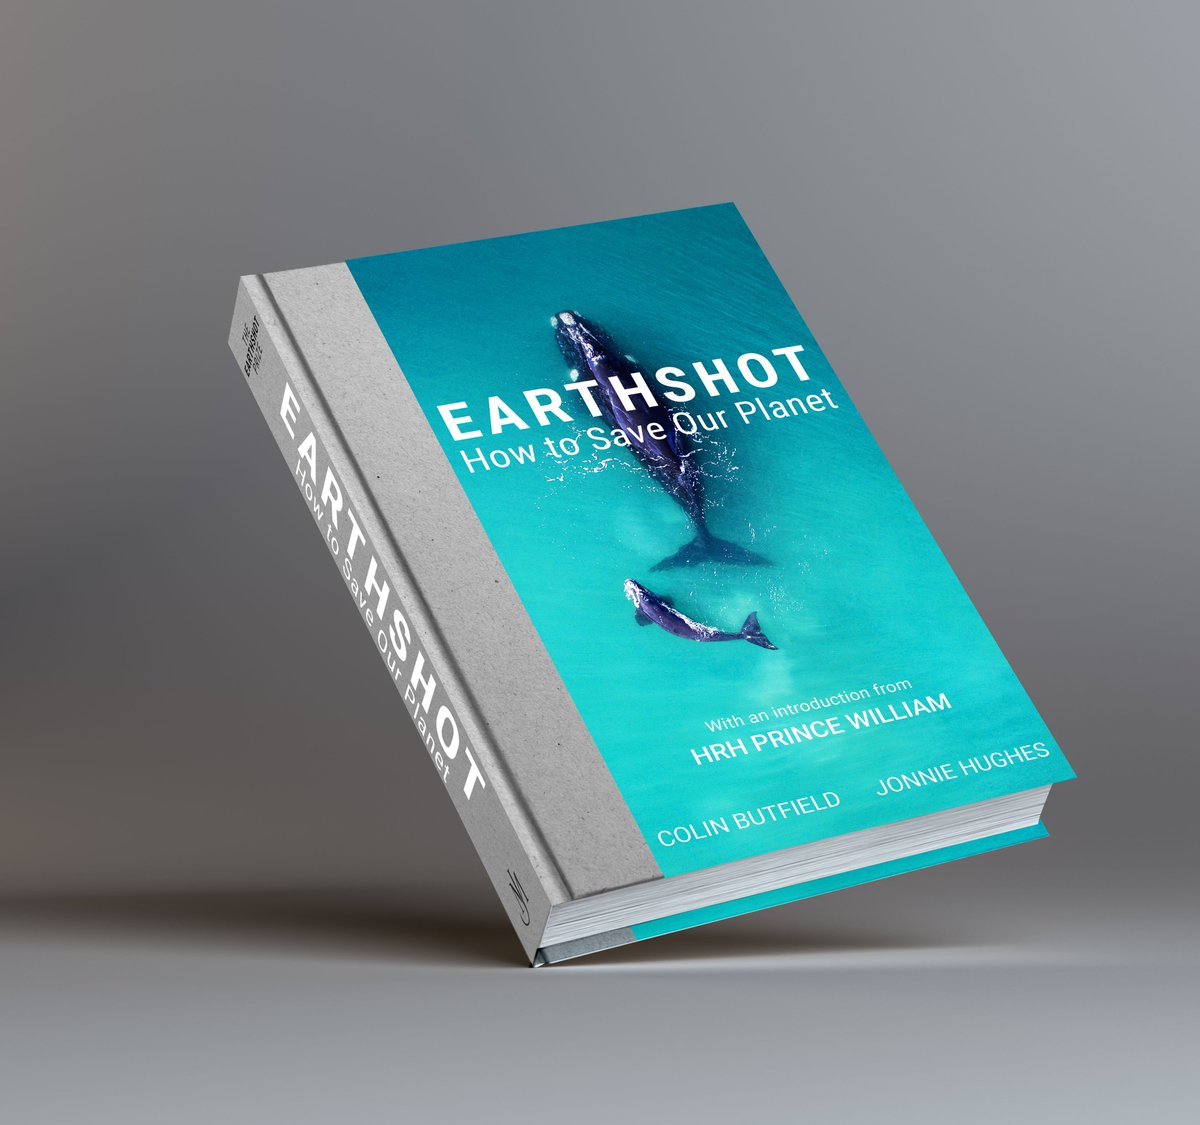 The @EarthshotPrize and @JohnMurrays announce the upcoming release of Earthshot: How To Save Our Planet. This definitive #EarthshotBook is available for pre-order
now. Find out more: johnmurraypress.co.uk/earthshotbook/